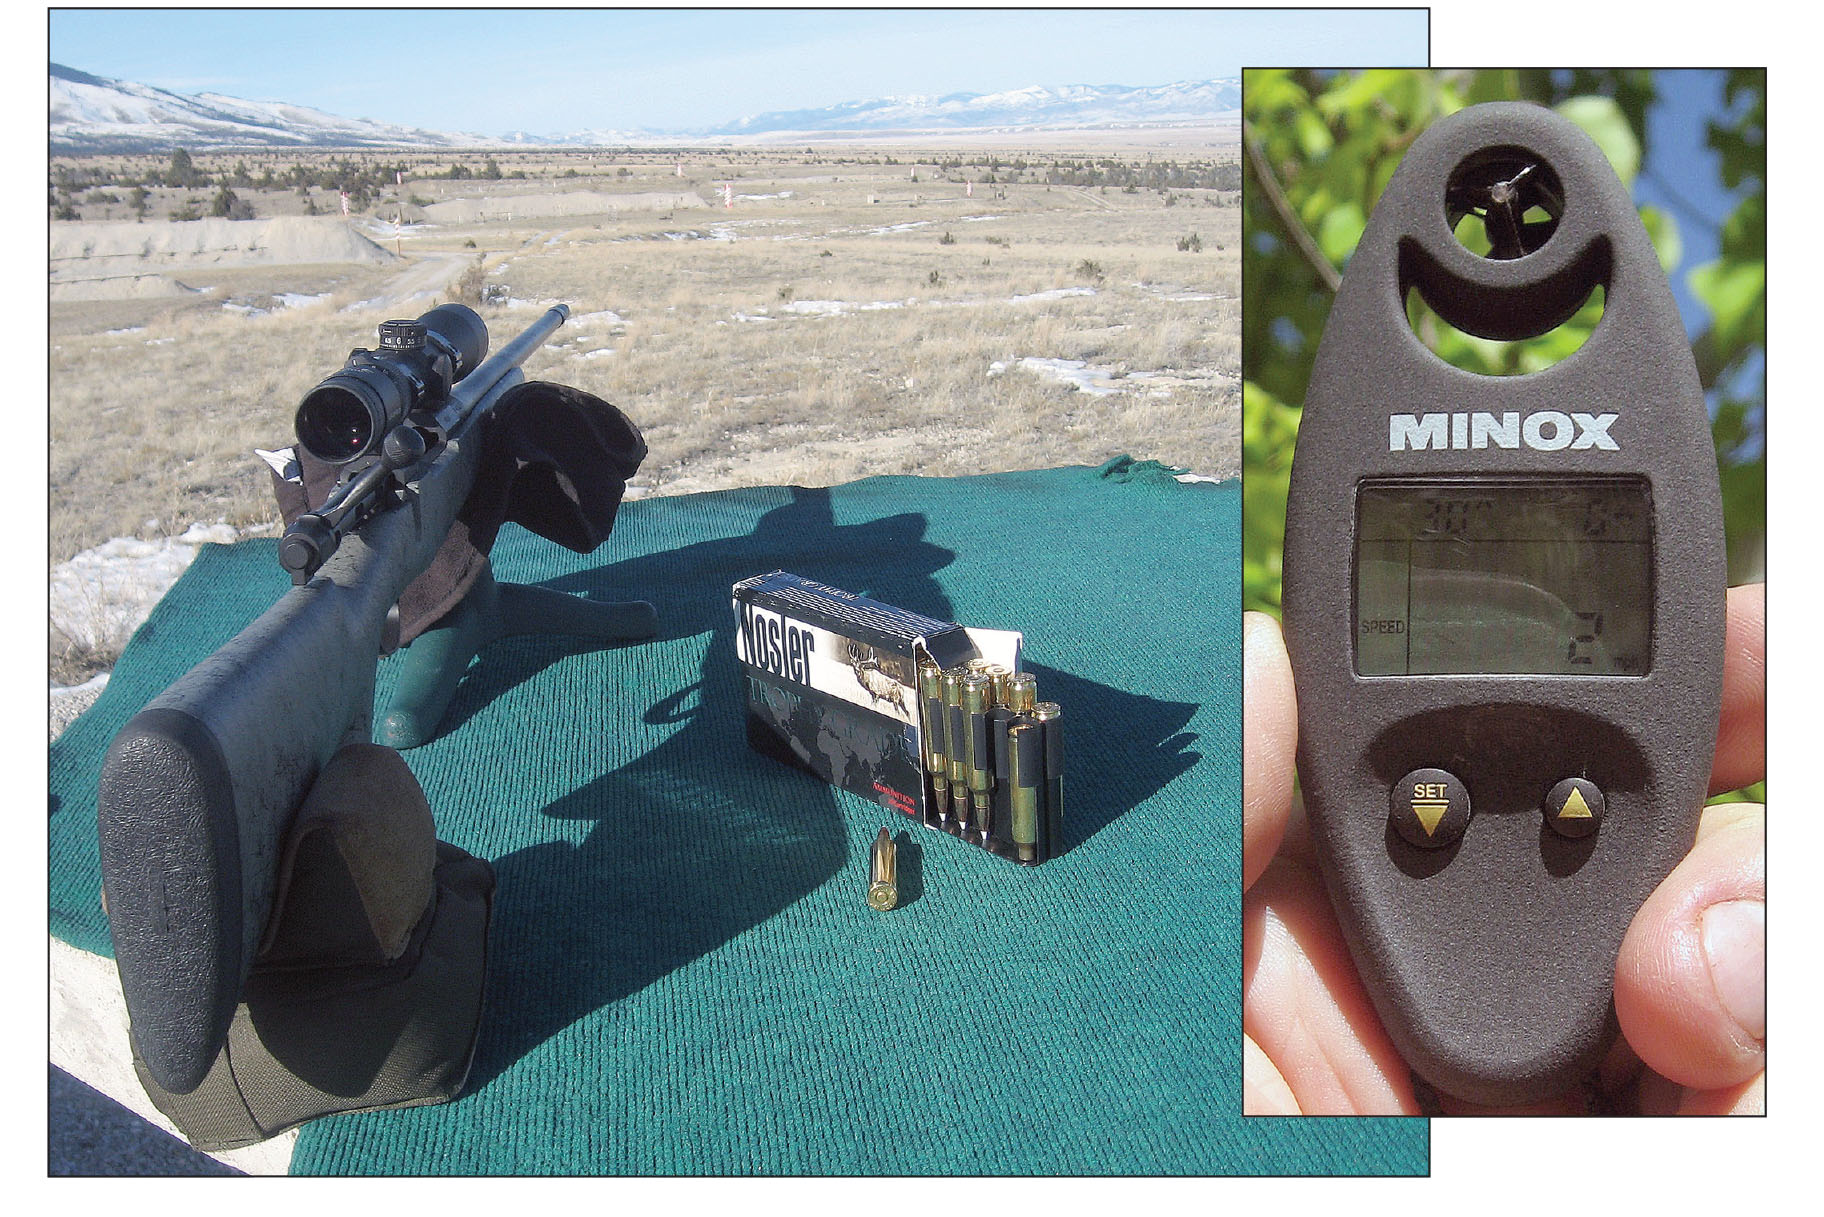 Even though electronic anemometers, like this Minox variant, can measure wind speed where a shooter stands, both wind velocity and direction can vary over longer distances.